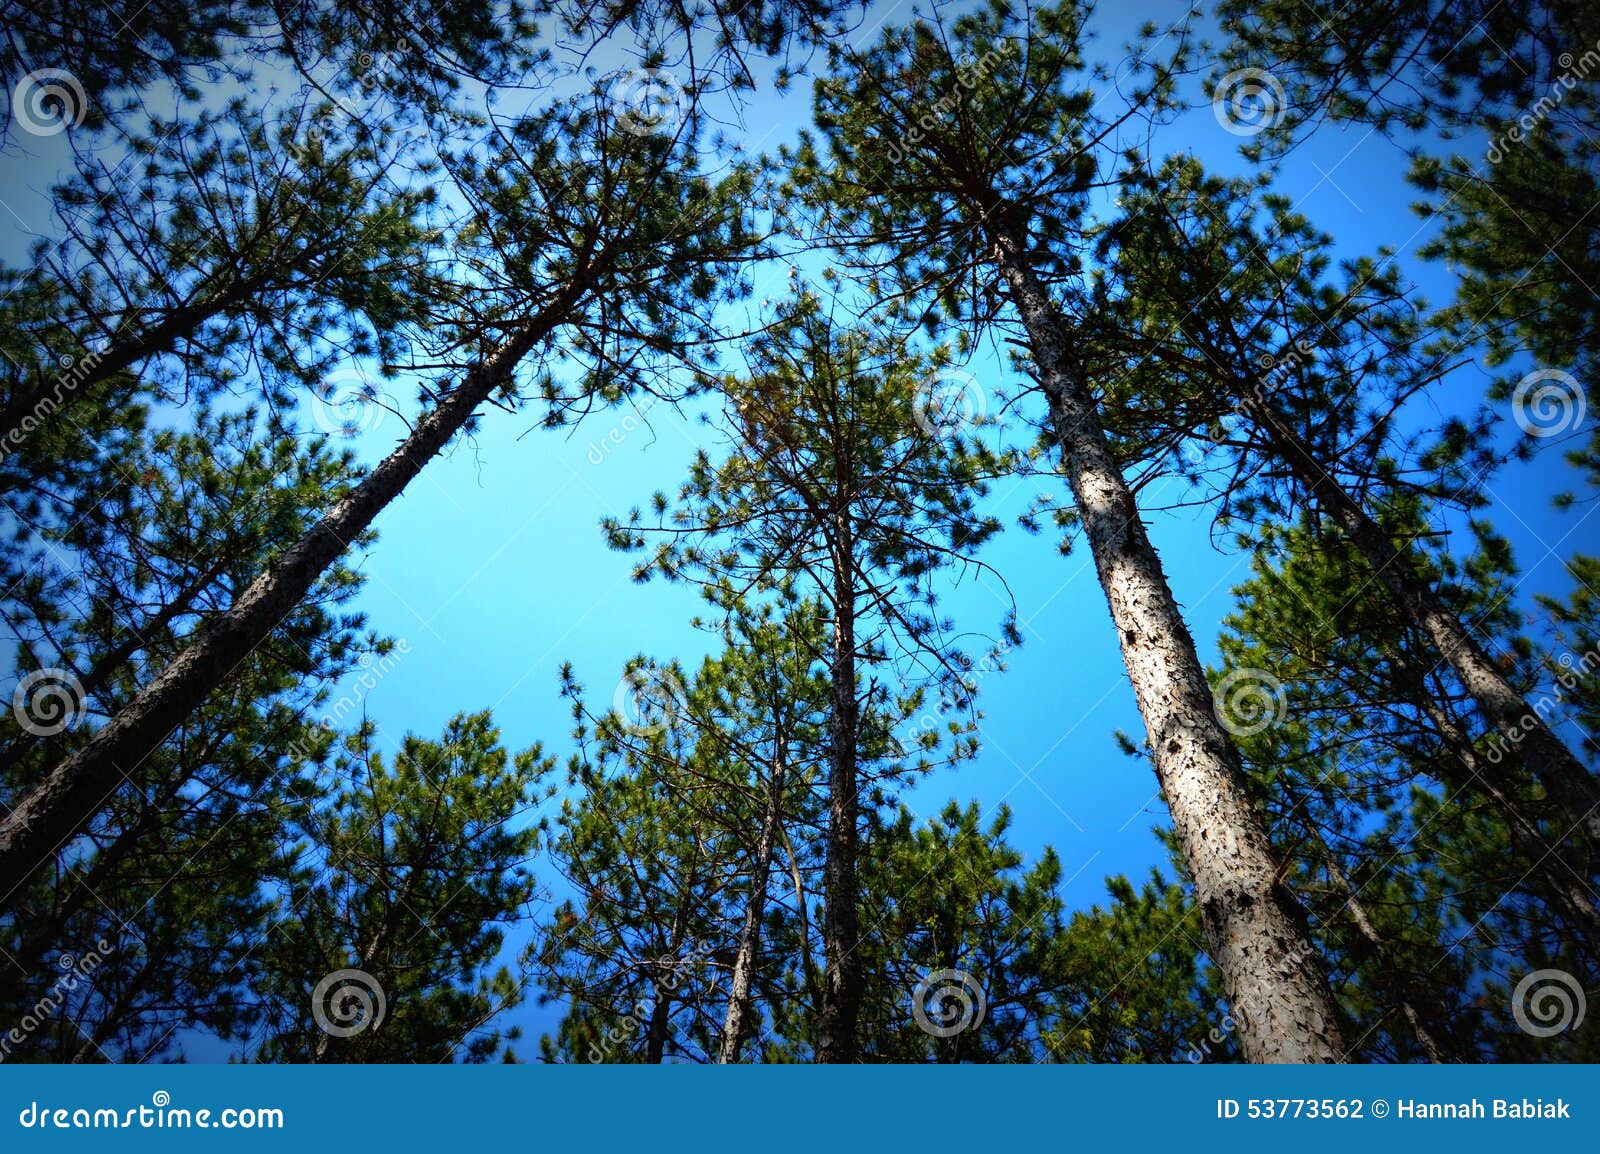 canopy of pine trees